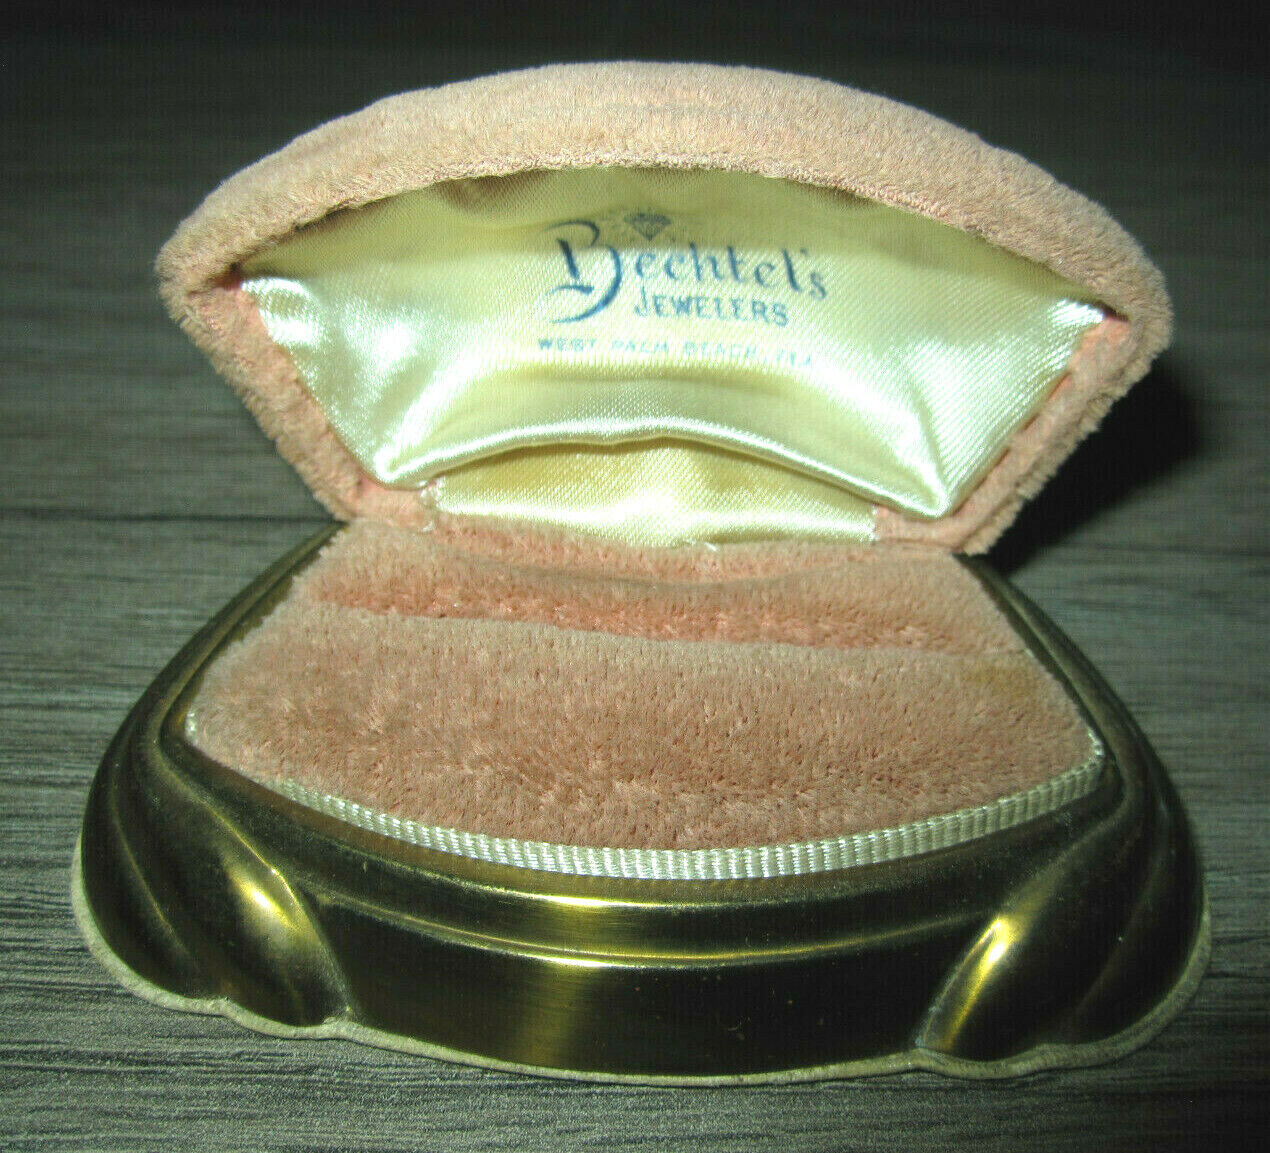 Vintage Bechtel's Jewelers of West Palm Beach, Florida pink & gold ring box